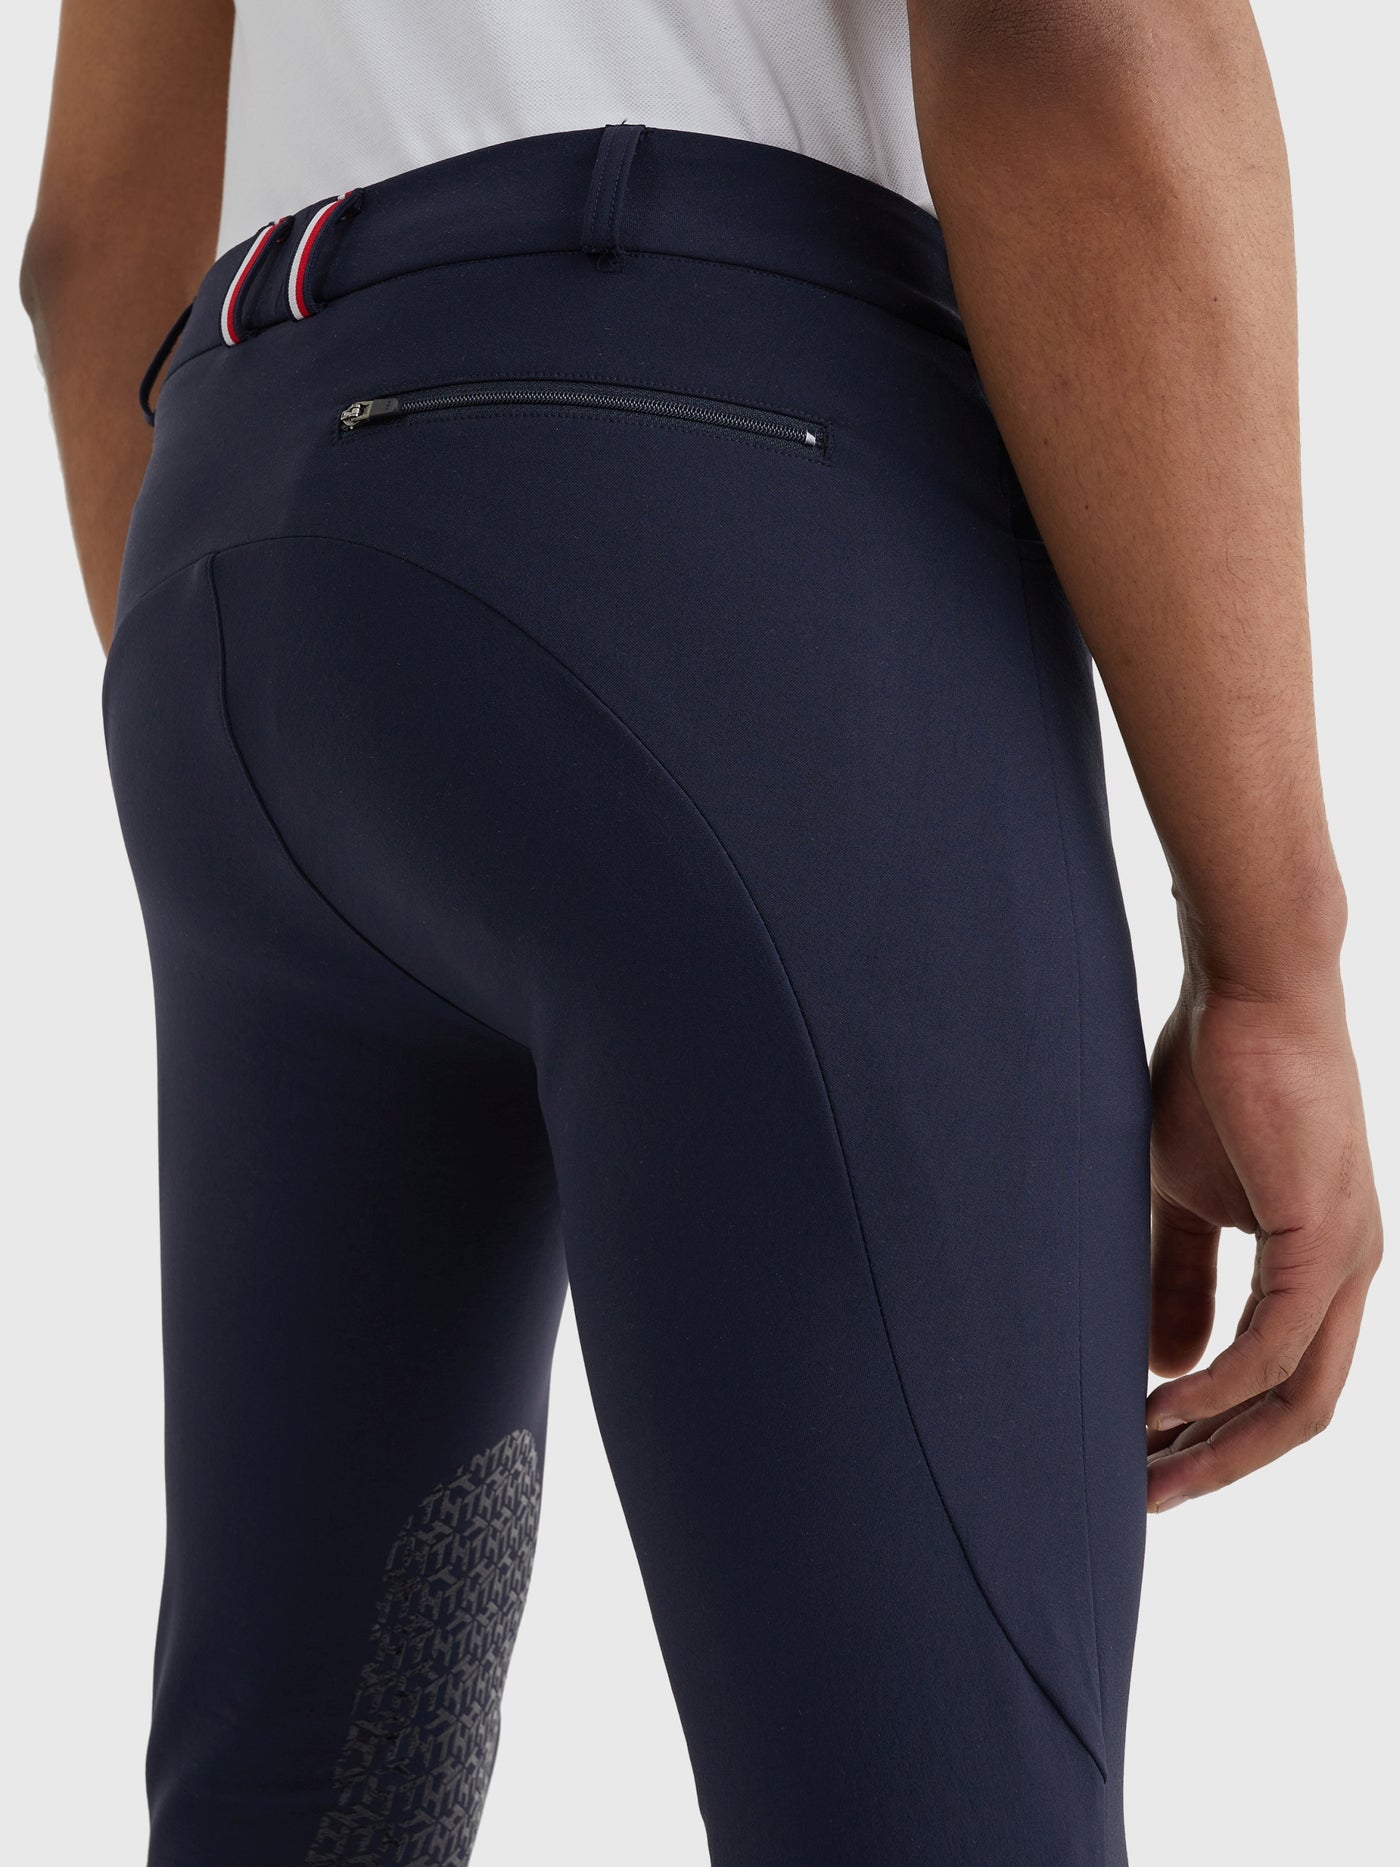 Men's knee patch breeches classic style